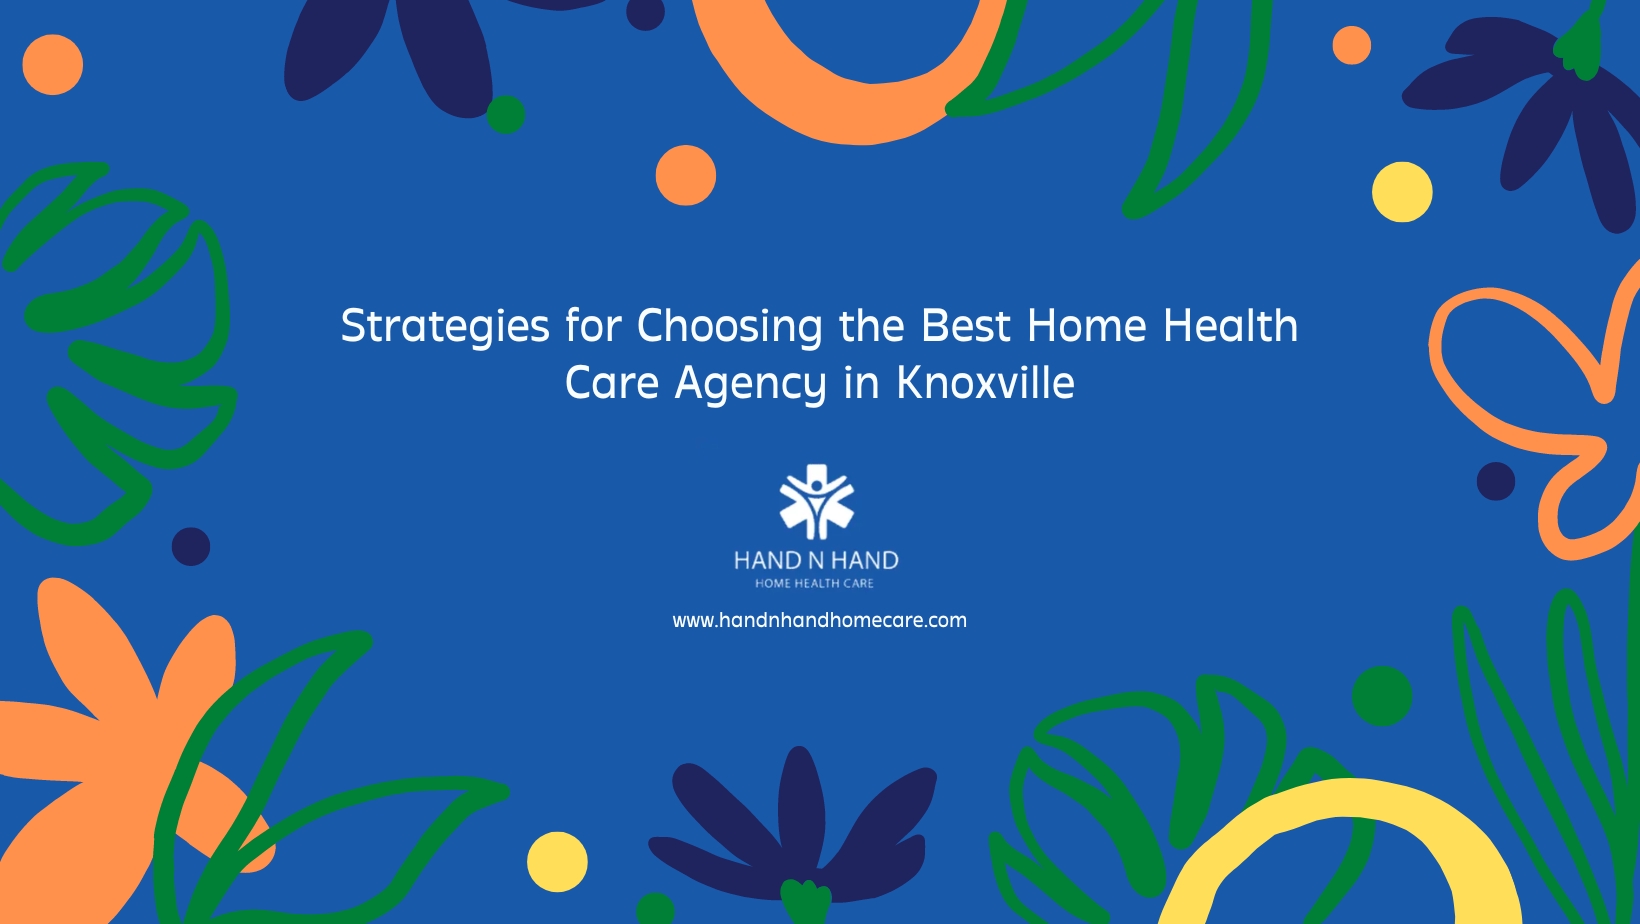 Strategies for Choosing the Best Home Health Care Agency in Knoxville